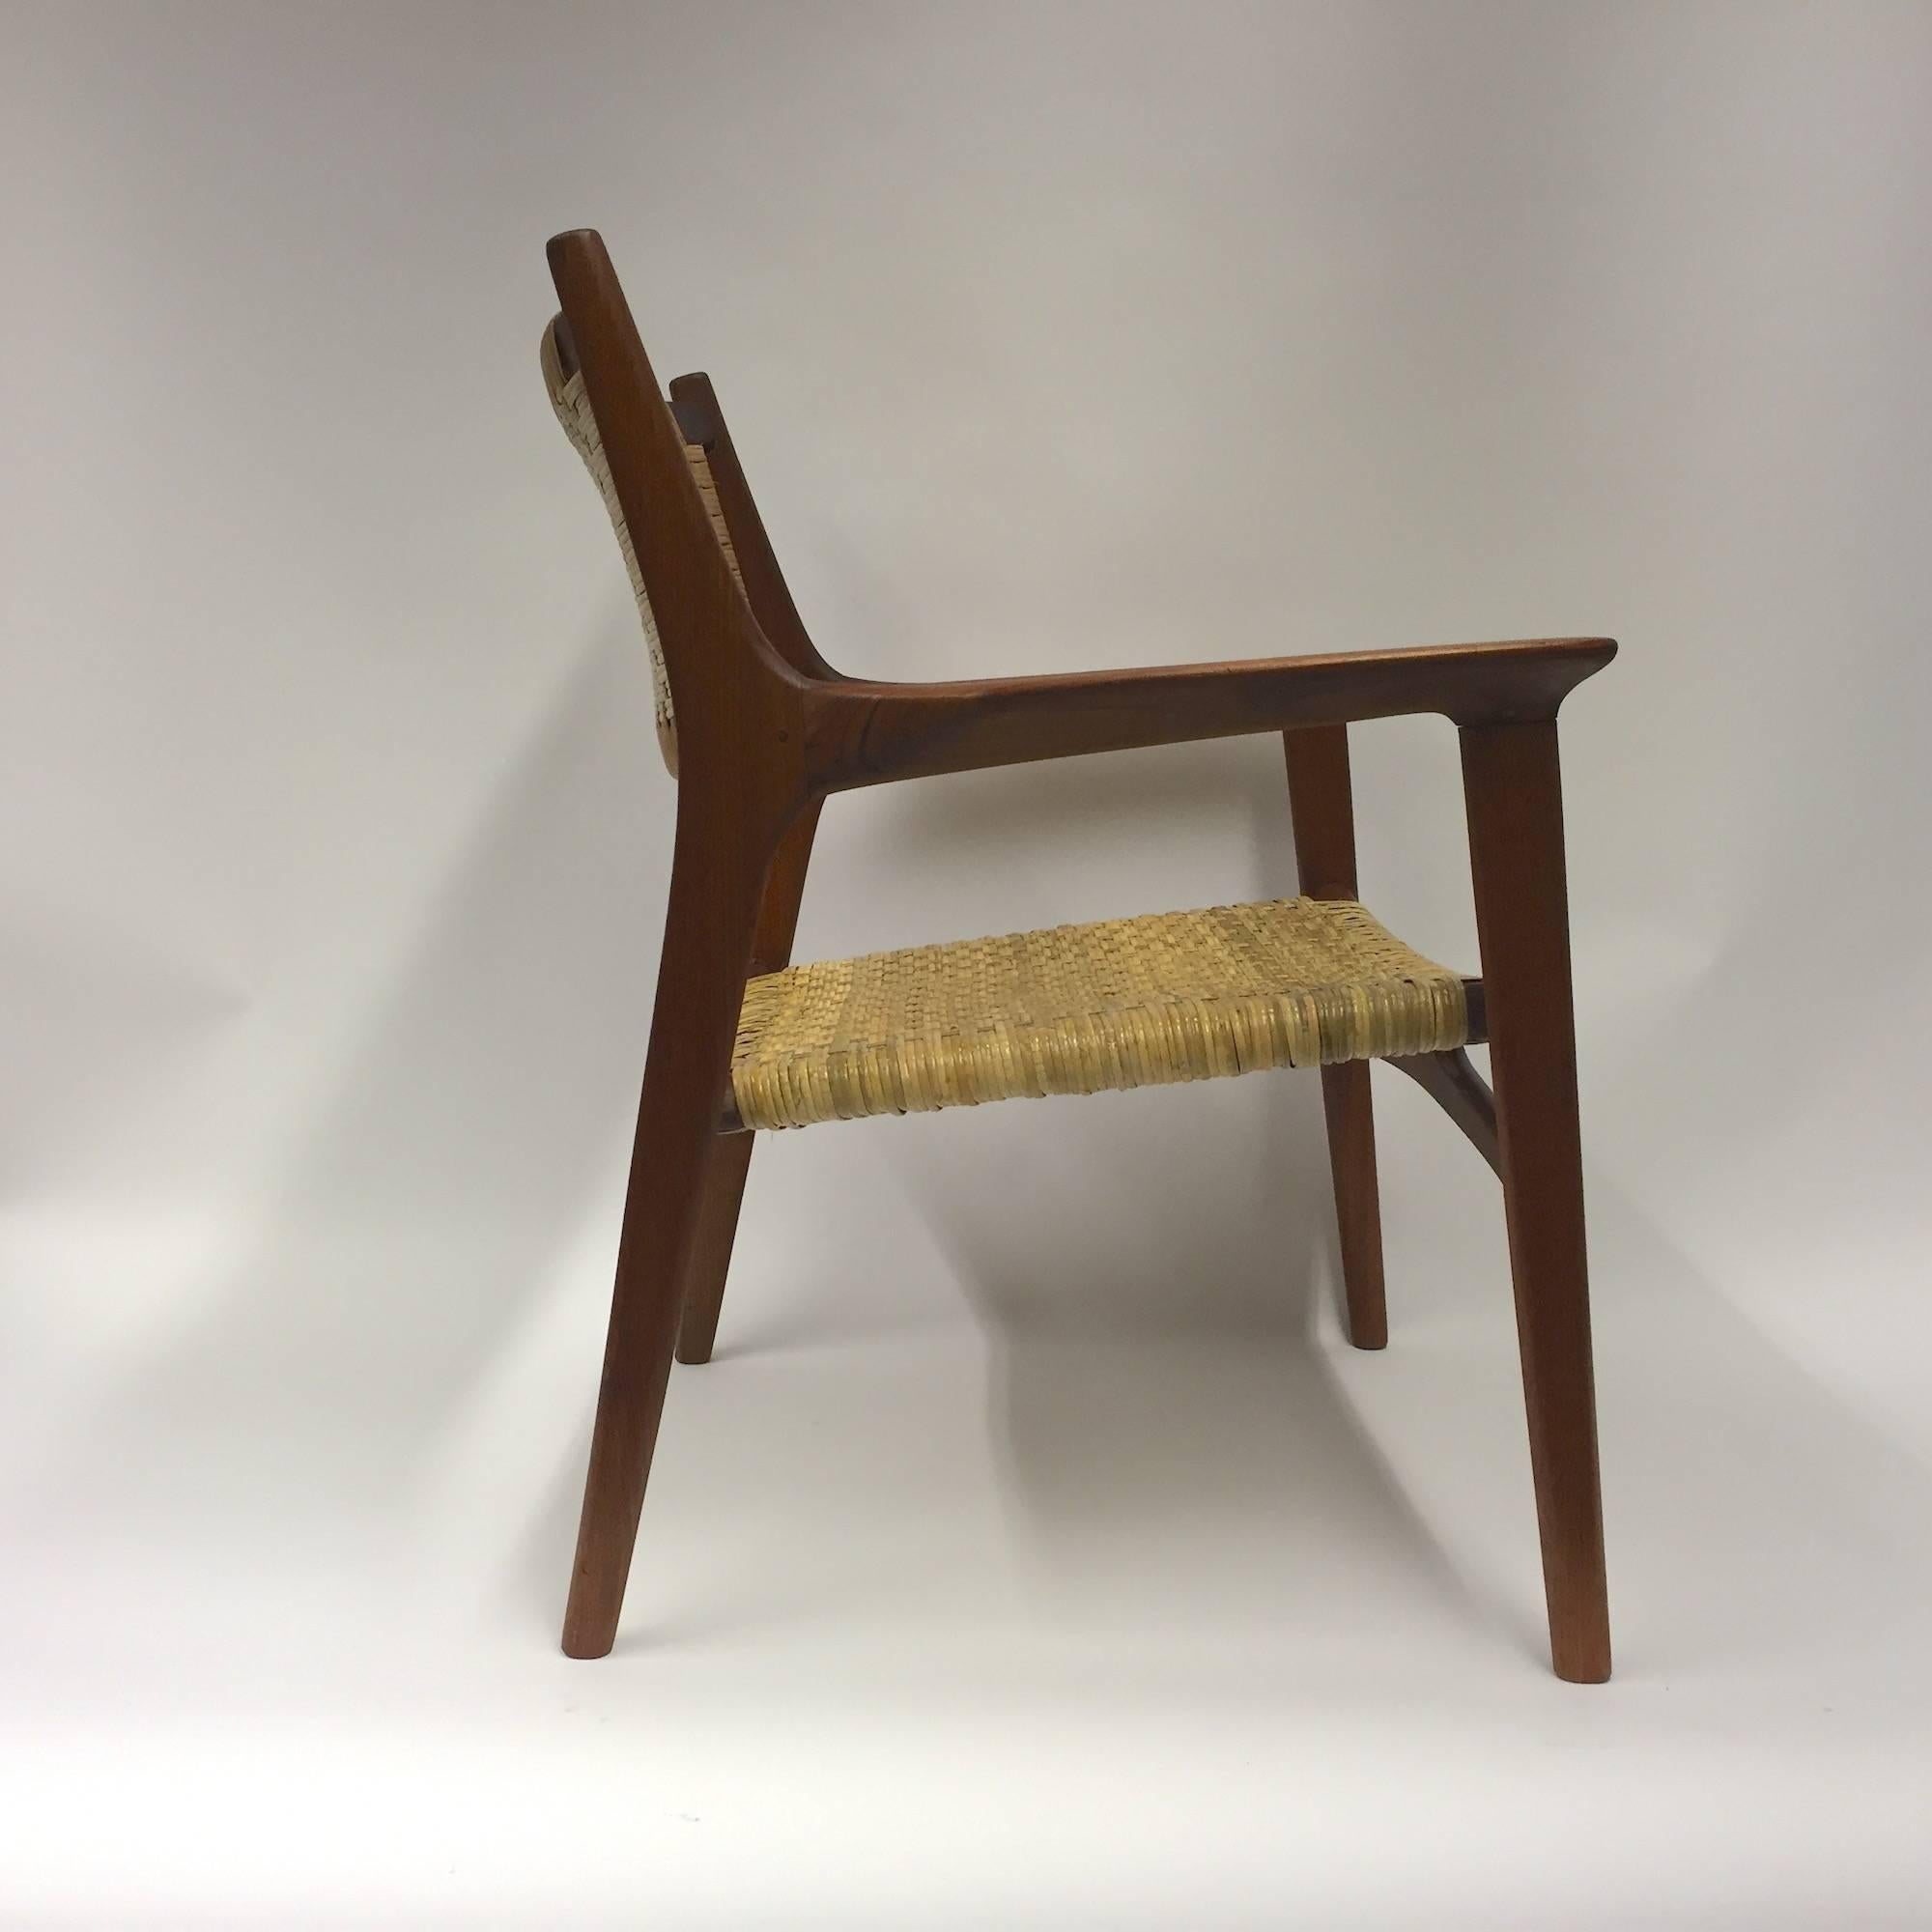 Hans J. Wegner

a fantastic rare lounge Armchair from Hans J. Wegner - made by Johannes Hansen, Copenhagen/ Denmark. Designed in 1951. Modell No. JH - 516

condition: the chair is in excellent conditions. The teak frame is strong, cane on the